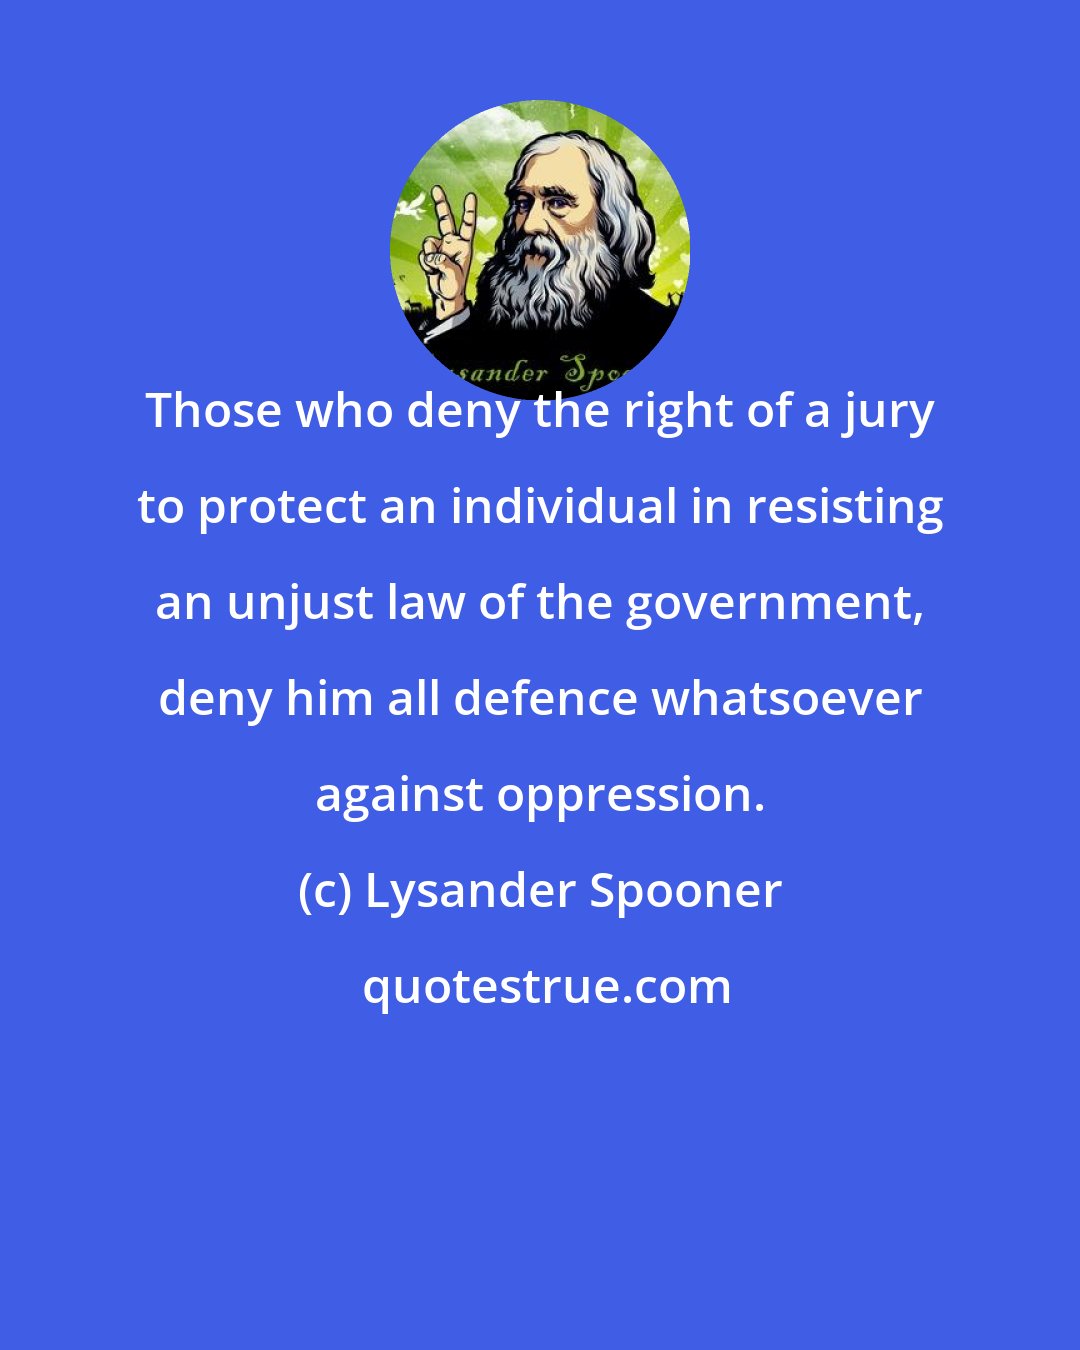 Lysander Spooner: Those who deny the right of a jury to protect an individual in resisting an unjust law of the government, deny him all defence whatsoever against oppression.